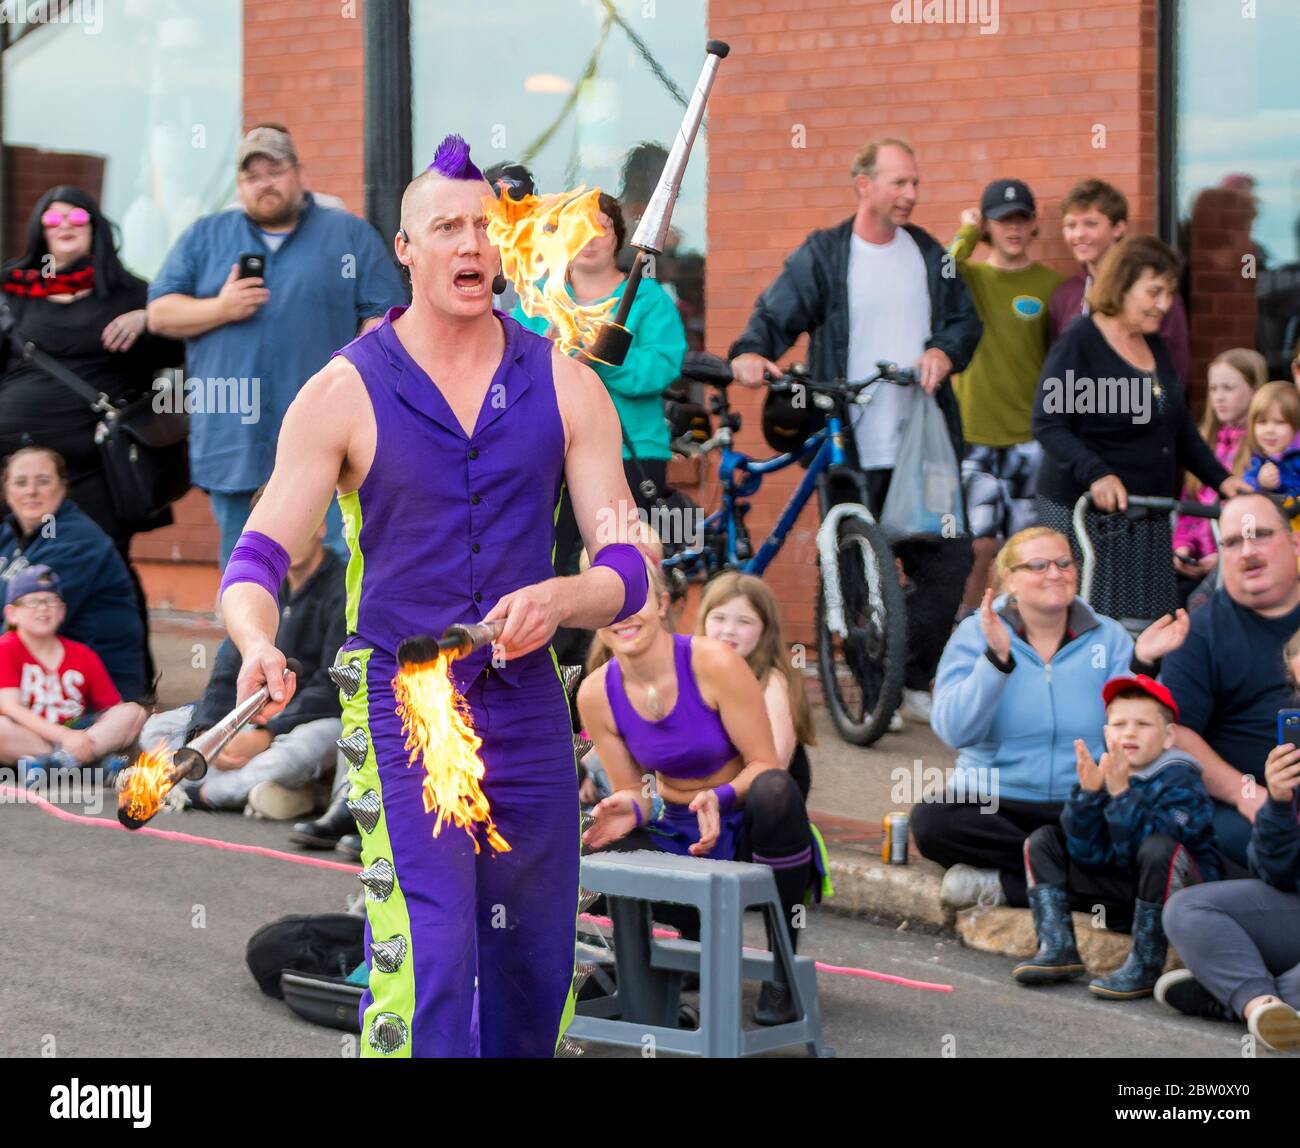 Saint John, New Brunswick, Canada - July 13, 2017: Annual Buskers On The Bay Festival. A man with purple mohawk hair juggles fire batons. Stock Photo